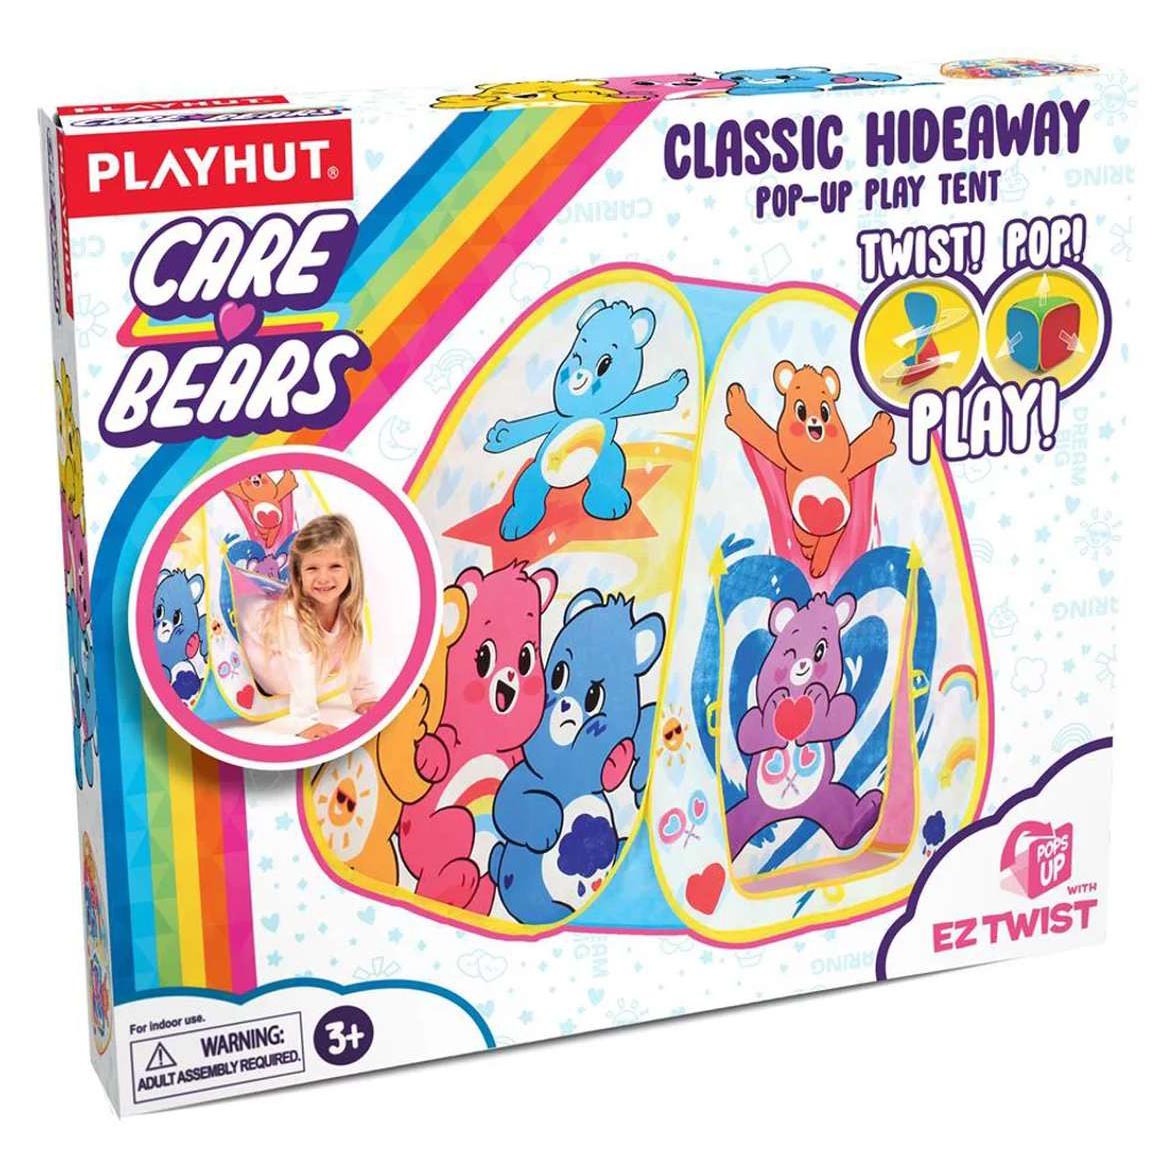 Playhut Classic Hideaway Pop Up Play Tent - Care Bears